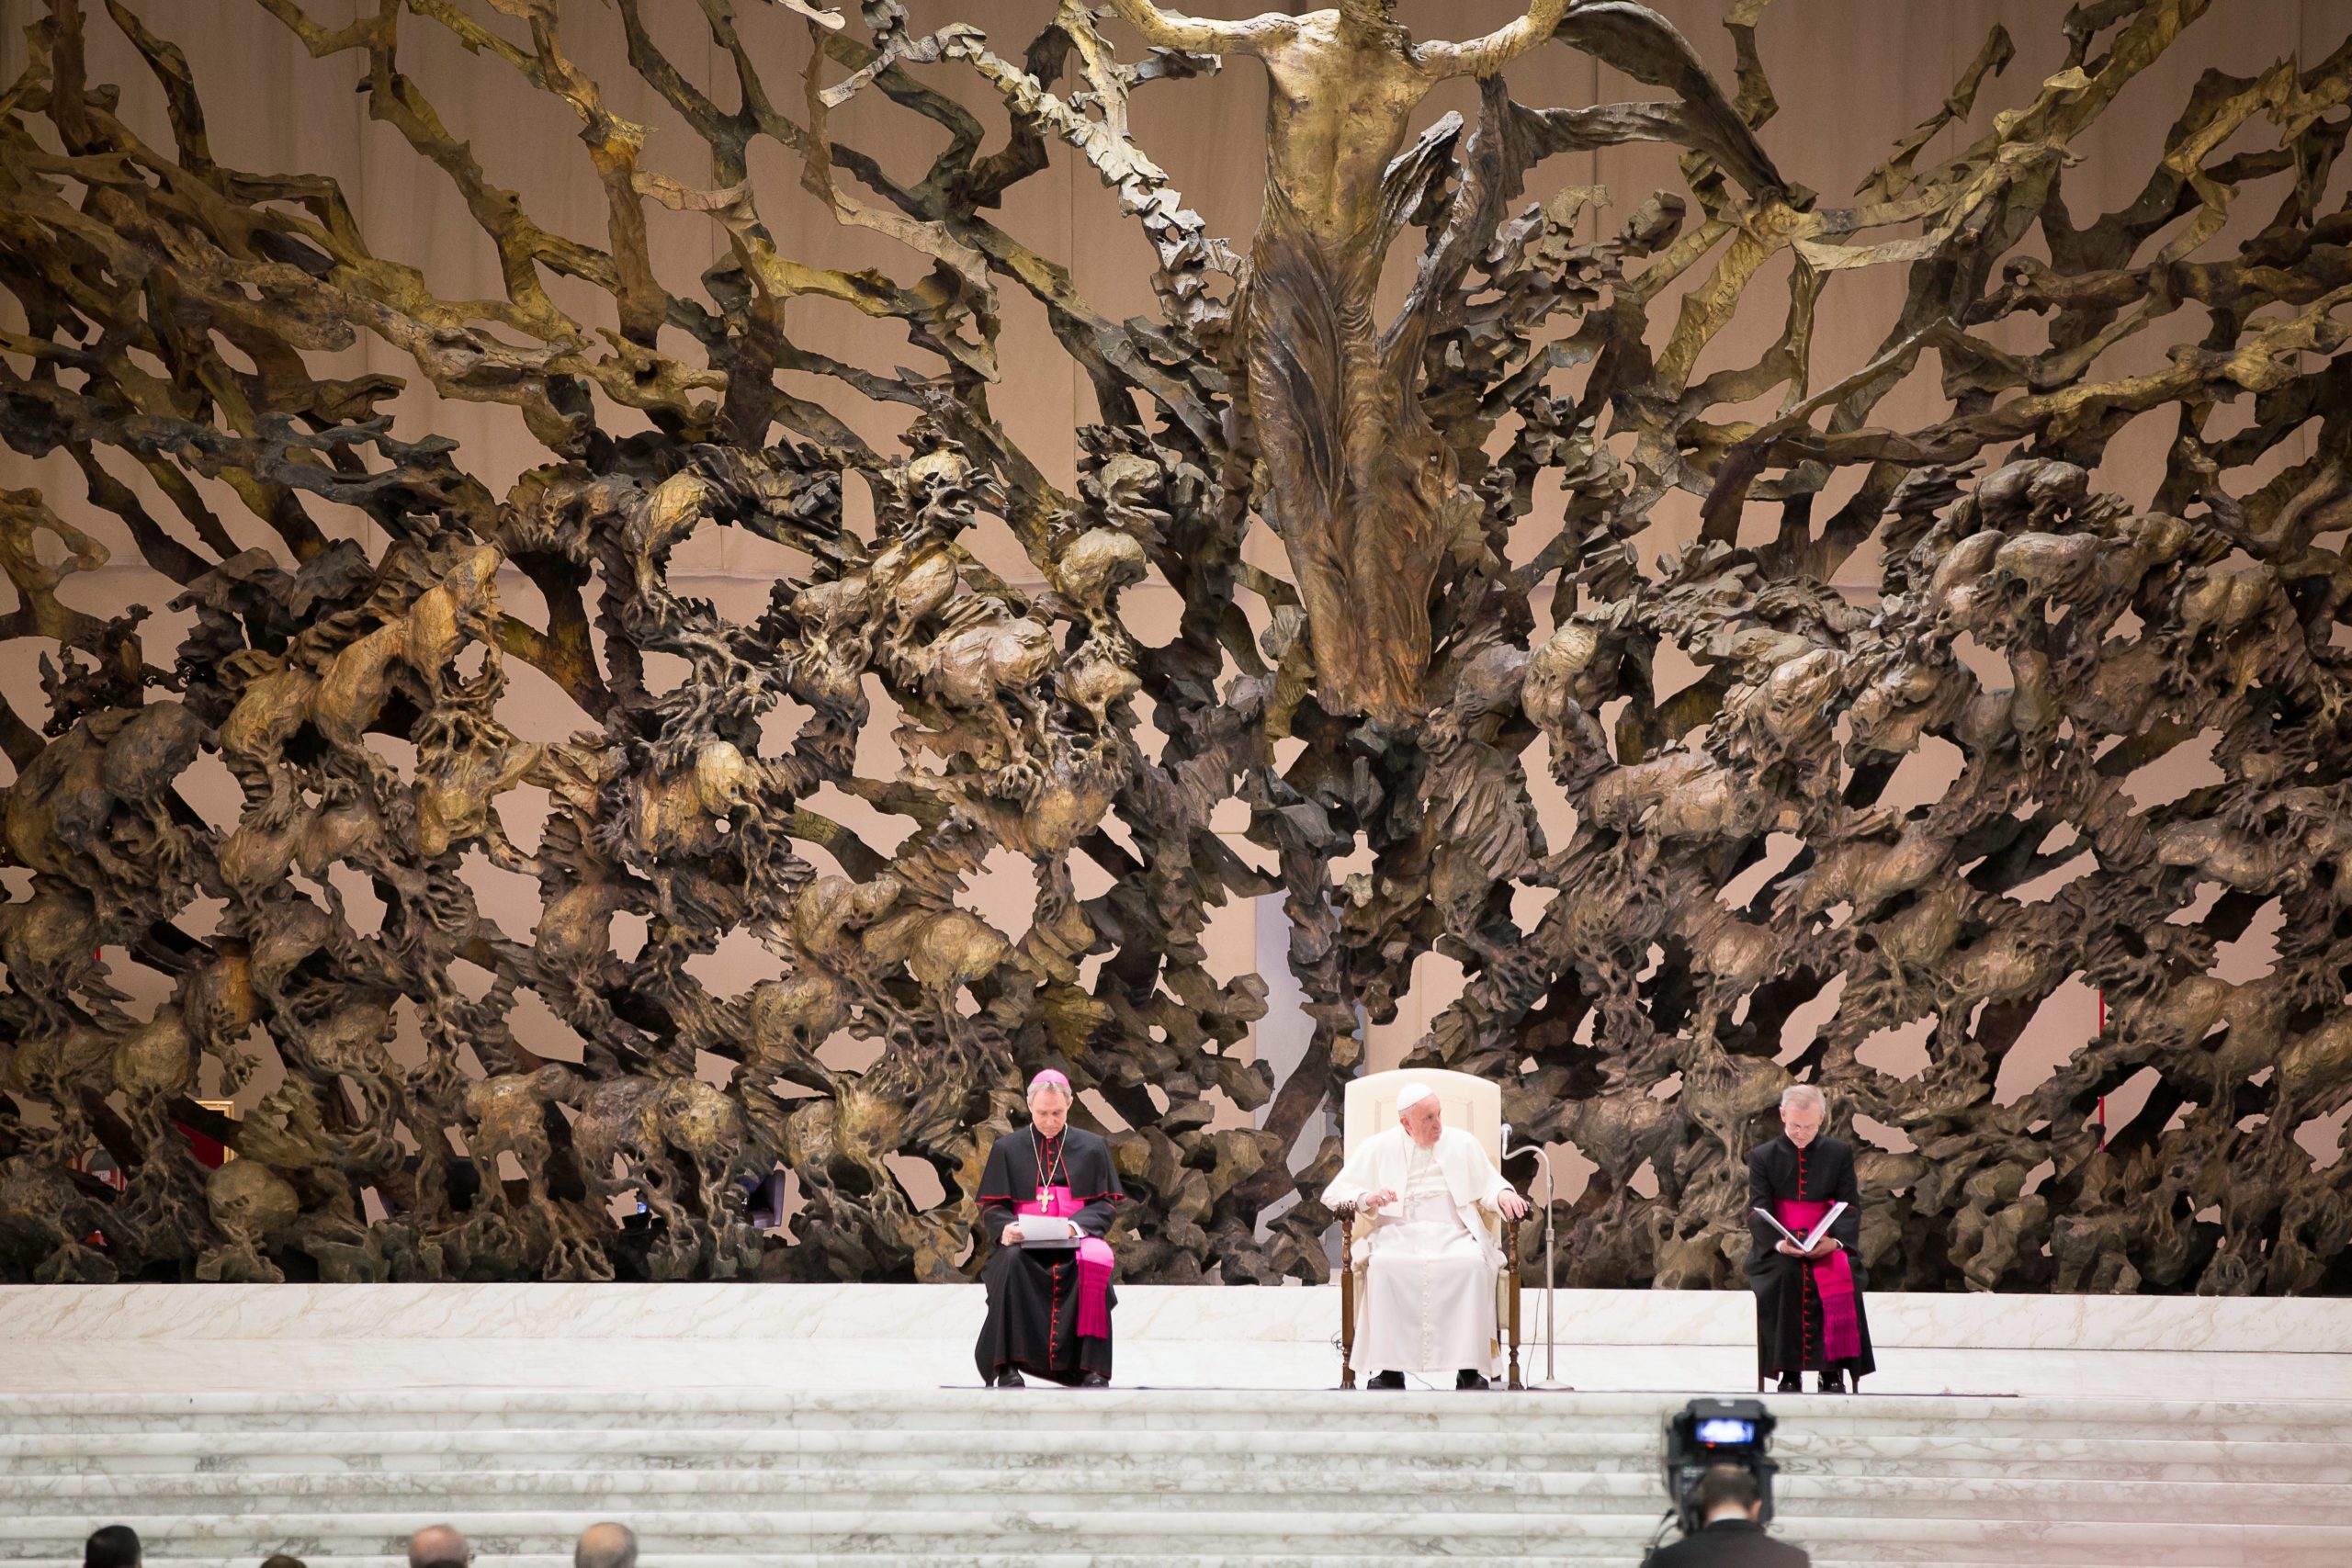 Fazzini's The Resurrection – The Vatican's creepy sculpture behind the pope  – Public Delivery